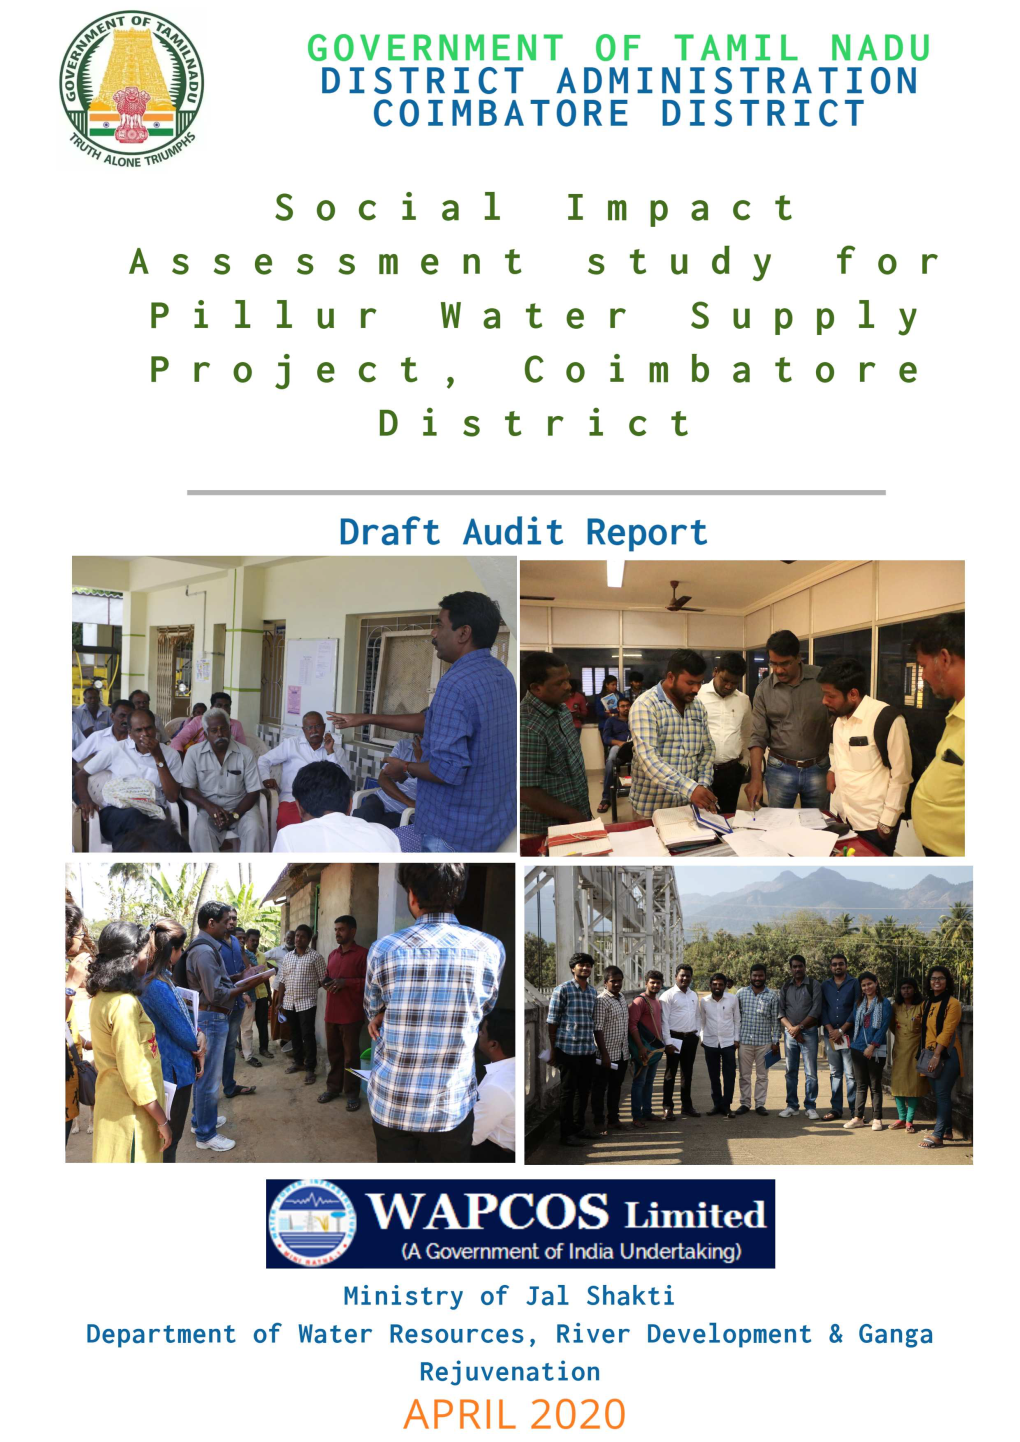 Social Impact Assessment Study for Pillur Water Supply Project, Coimbatore District